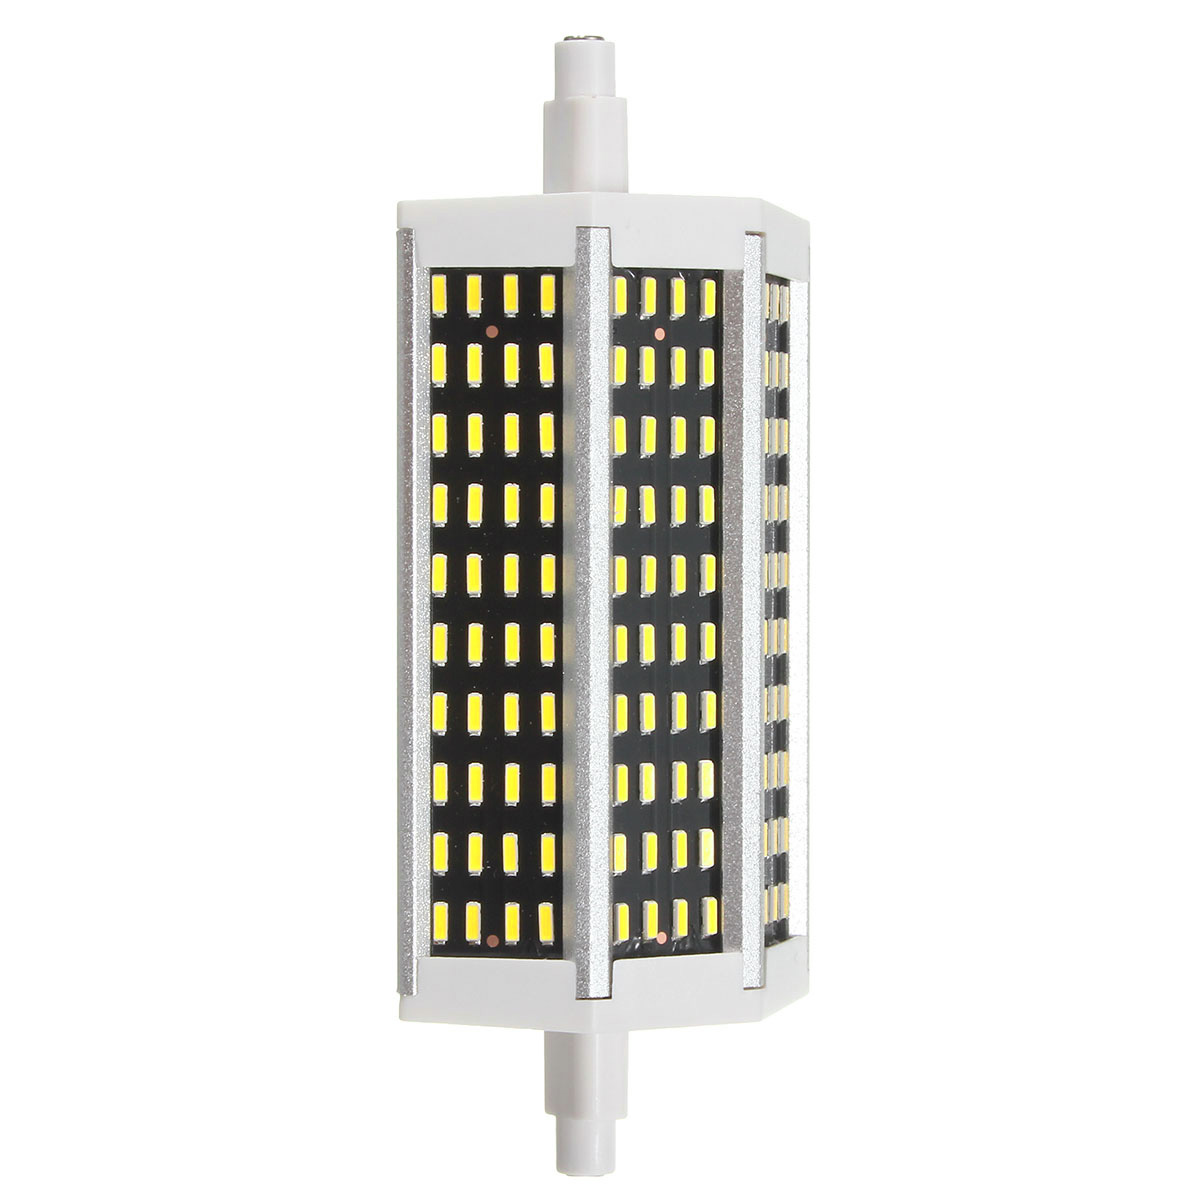 Dimmable-R7S-118mm-15W-120-SMD-4014-LED-Warm-White-Pure-White-Light-Lamp-Bulb-AC220V110V-1059884-7